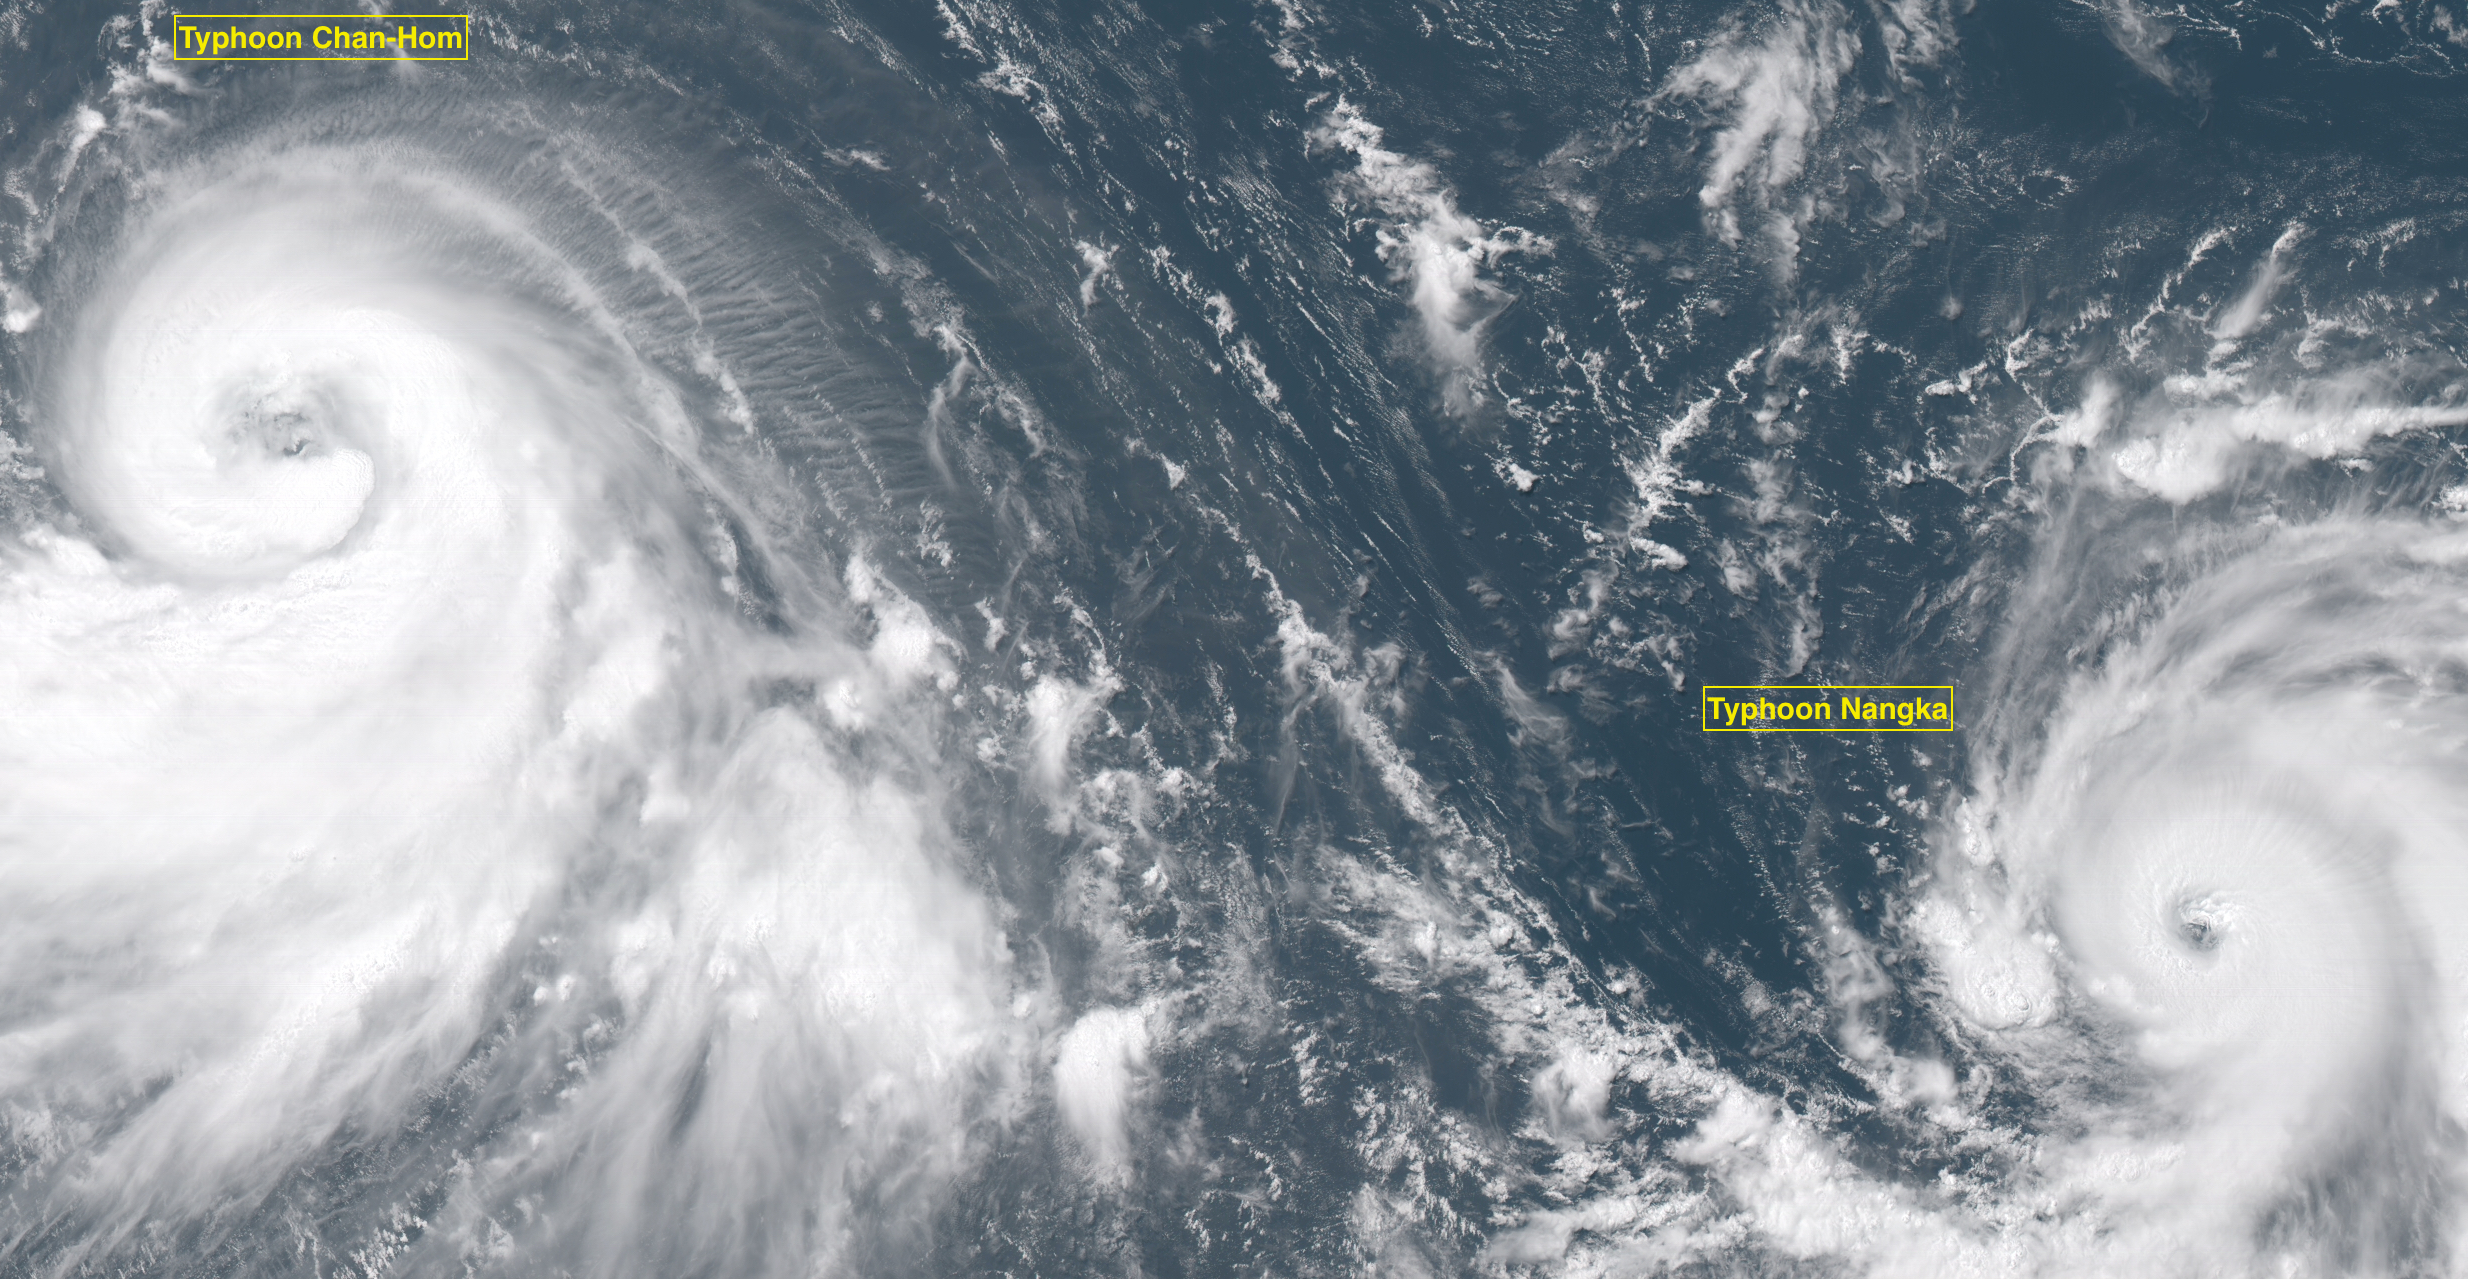 Typhoons Chan-Hom and Nangka in the West Pacific Ocean